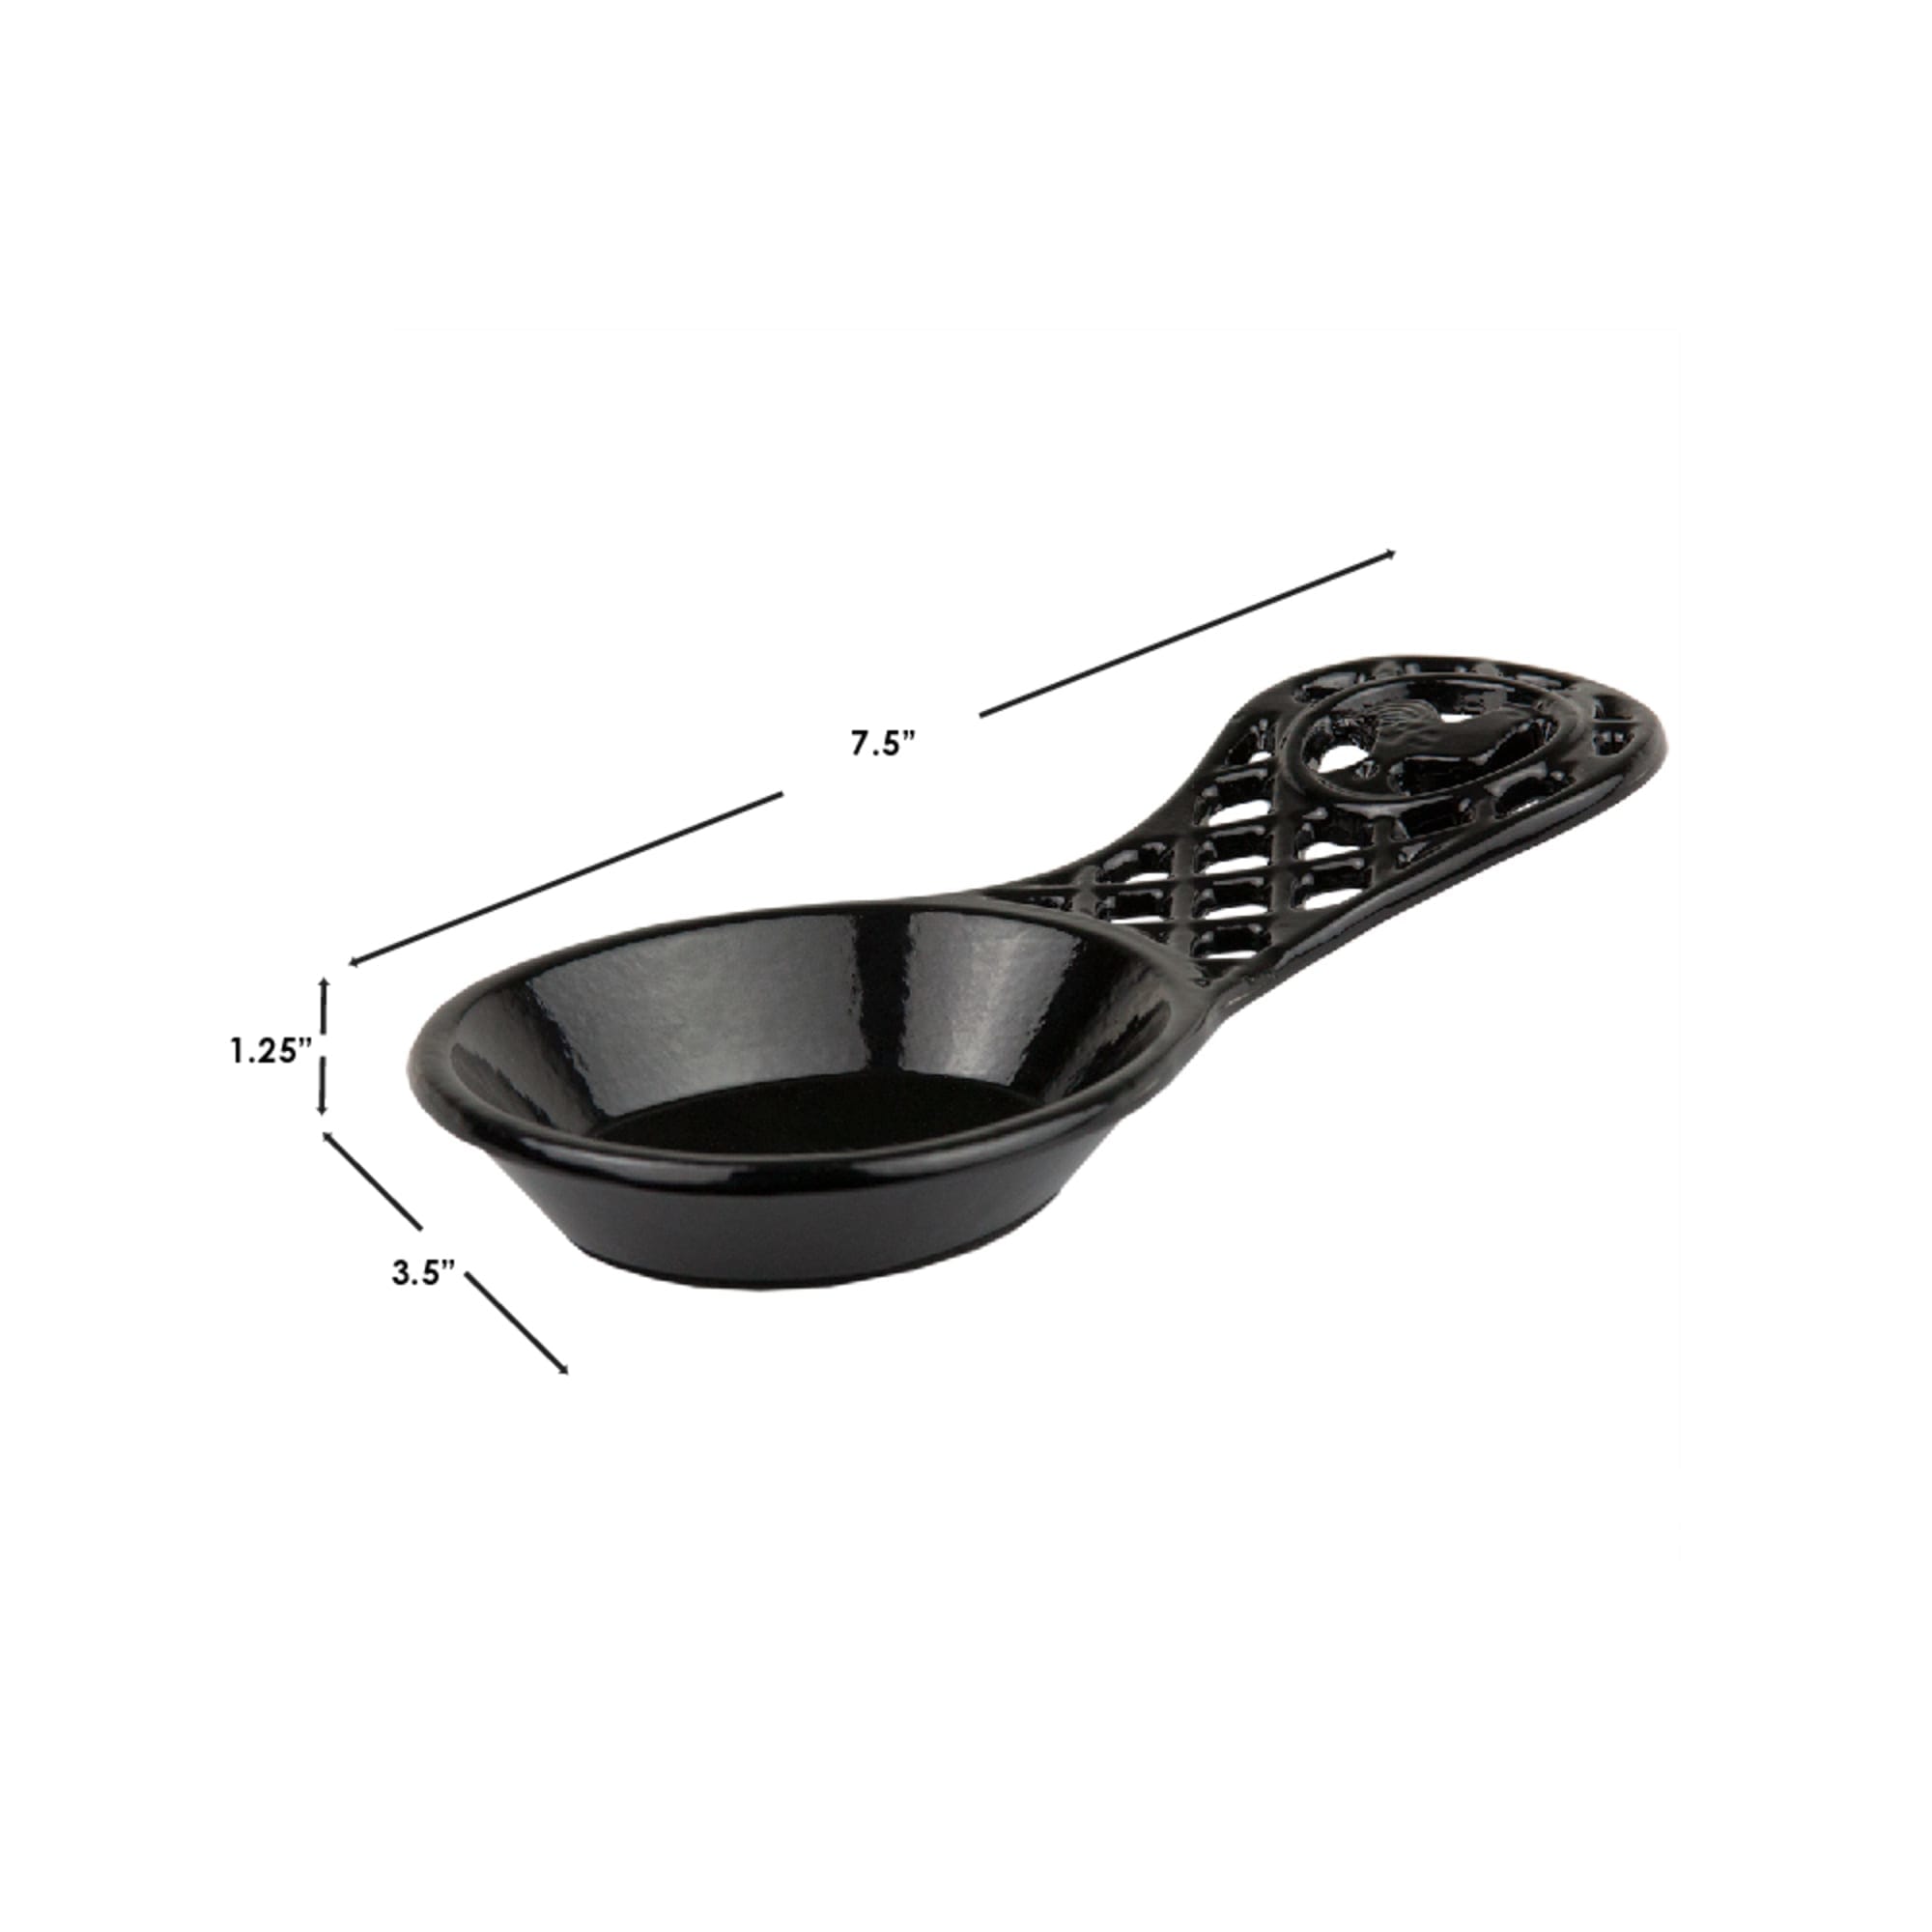 Home Basics Cast Iron Rooster Spoon Rest, Black $4.00 EACH, CASE PACK OF 6